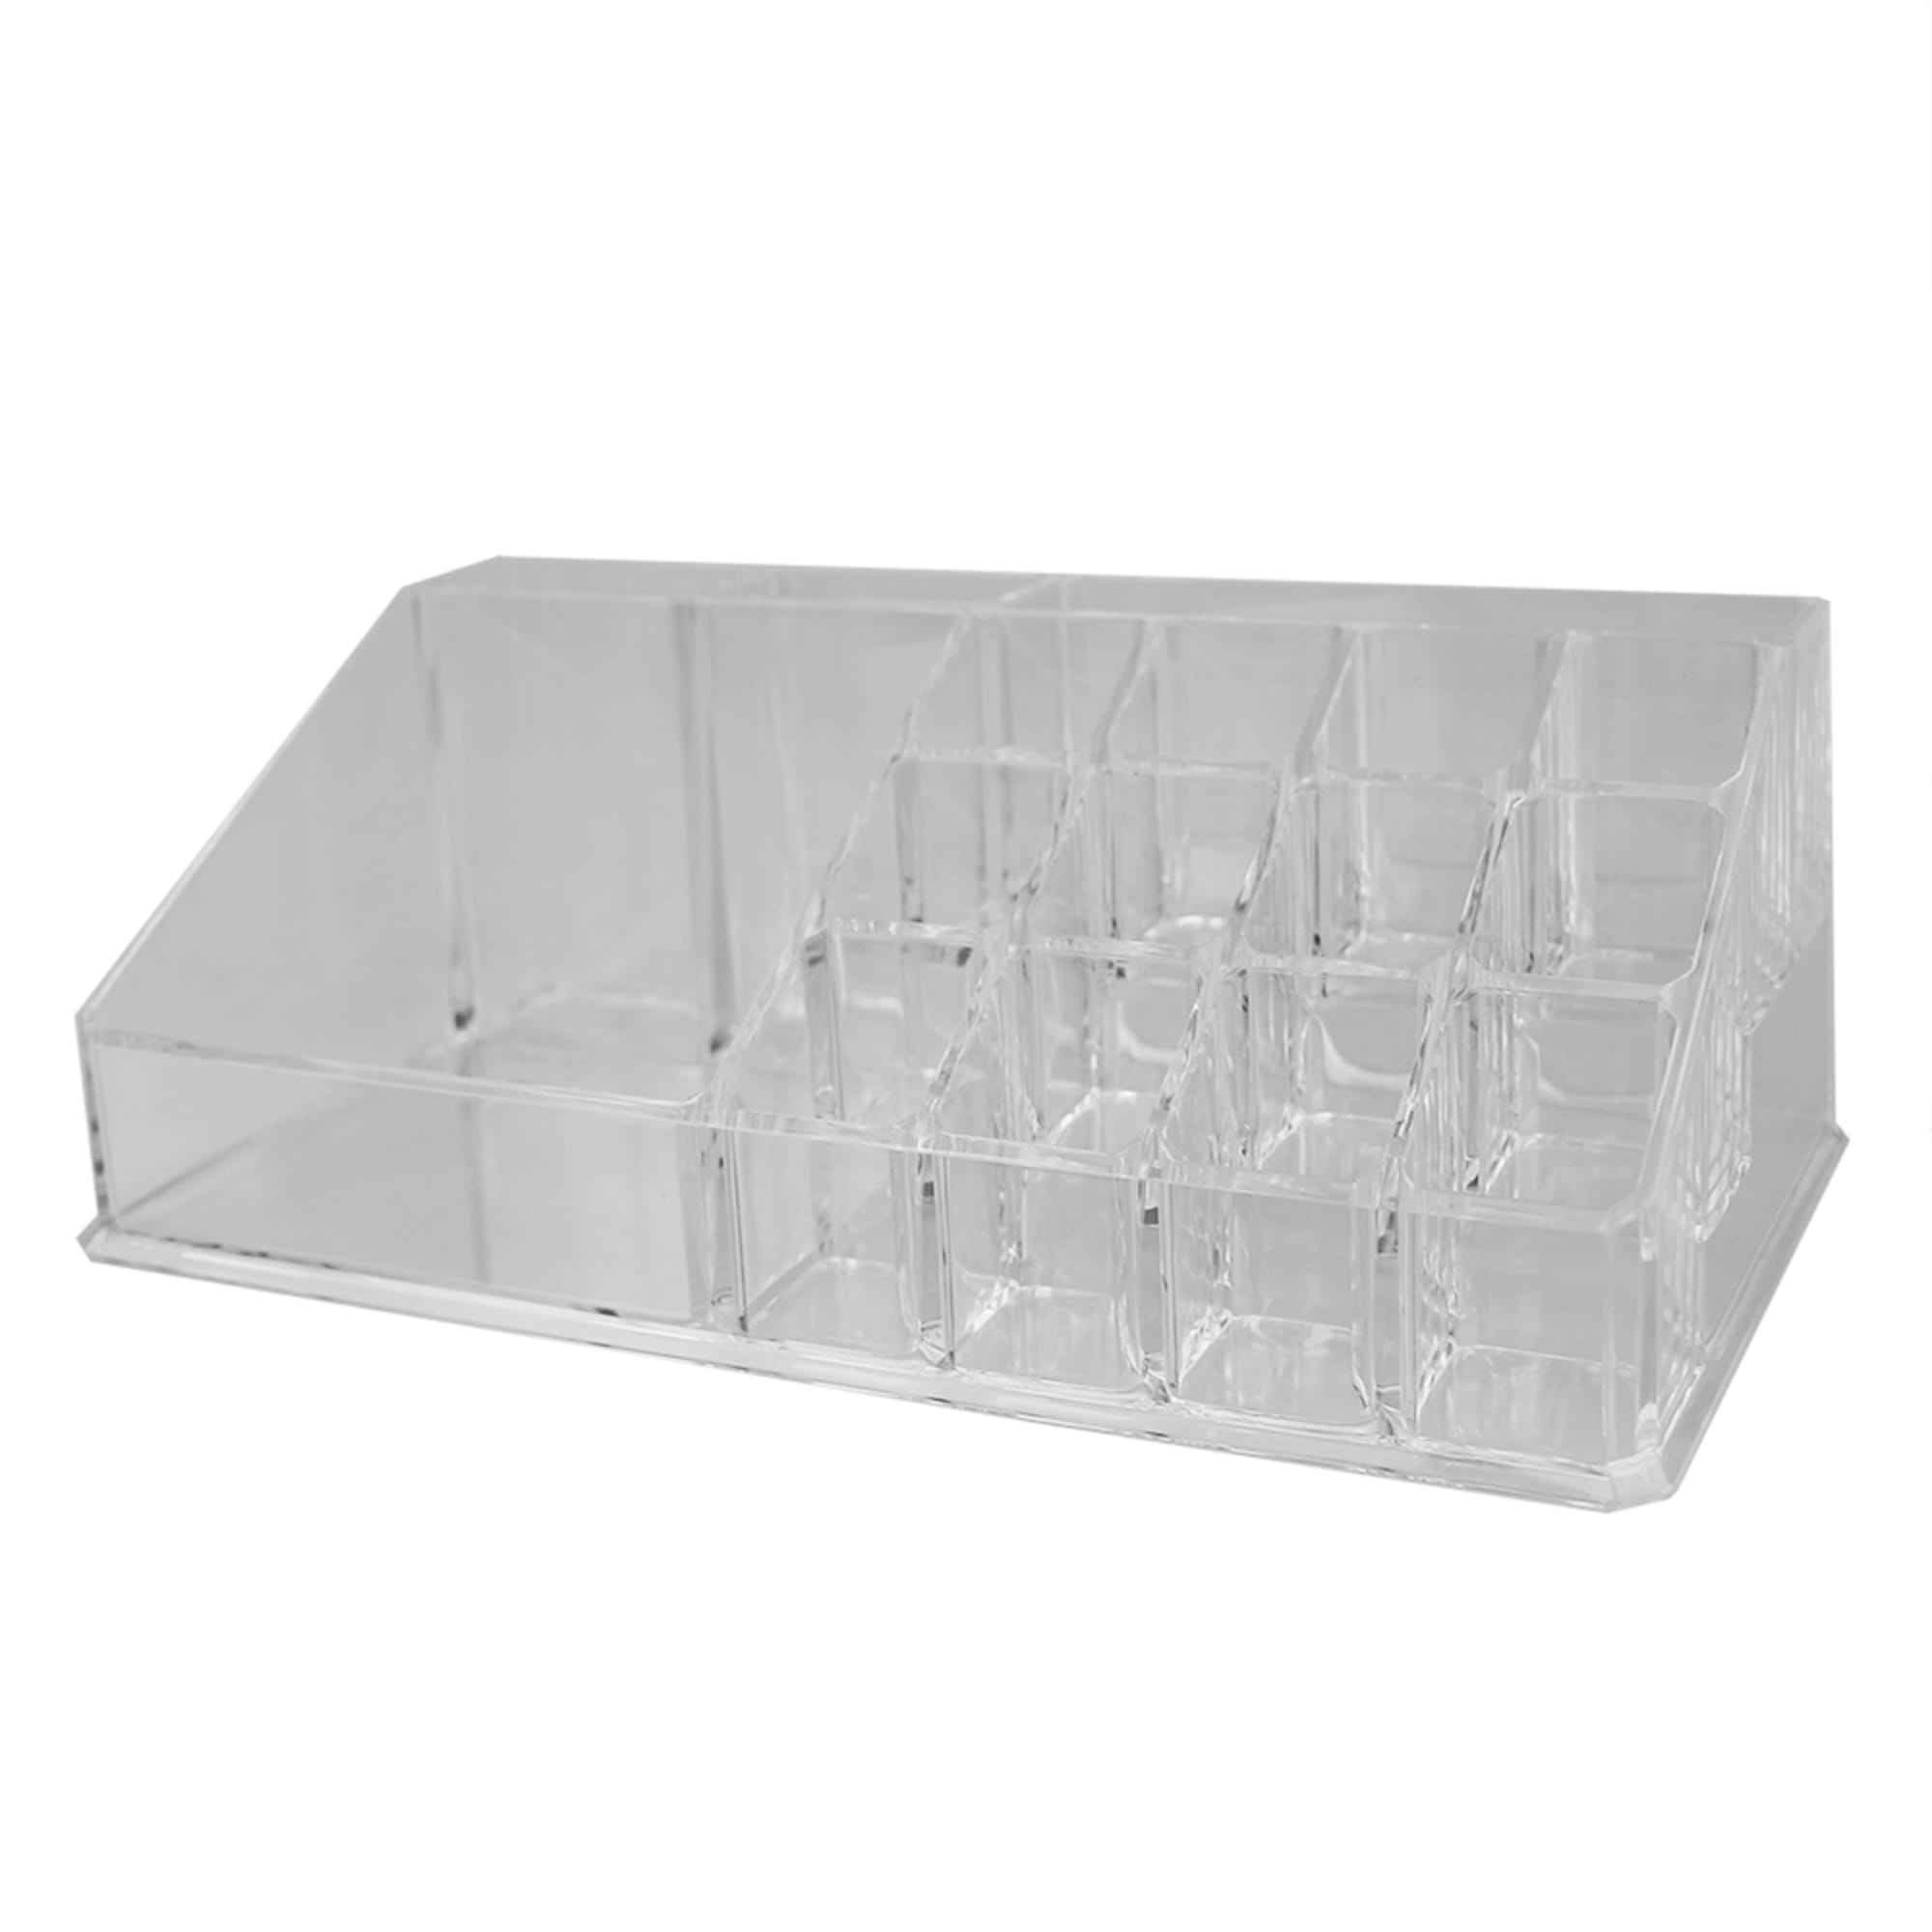 Home Basics 3 Tier Plastic Cosmetic Organizer, Clear $10.00 EACH, CASE PACK OF 4